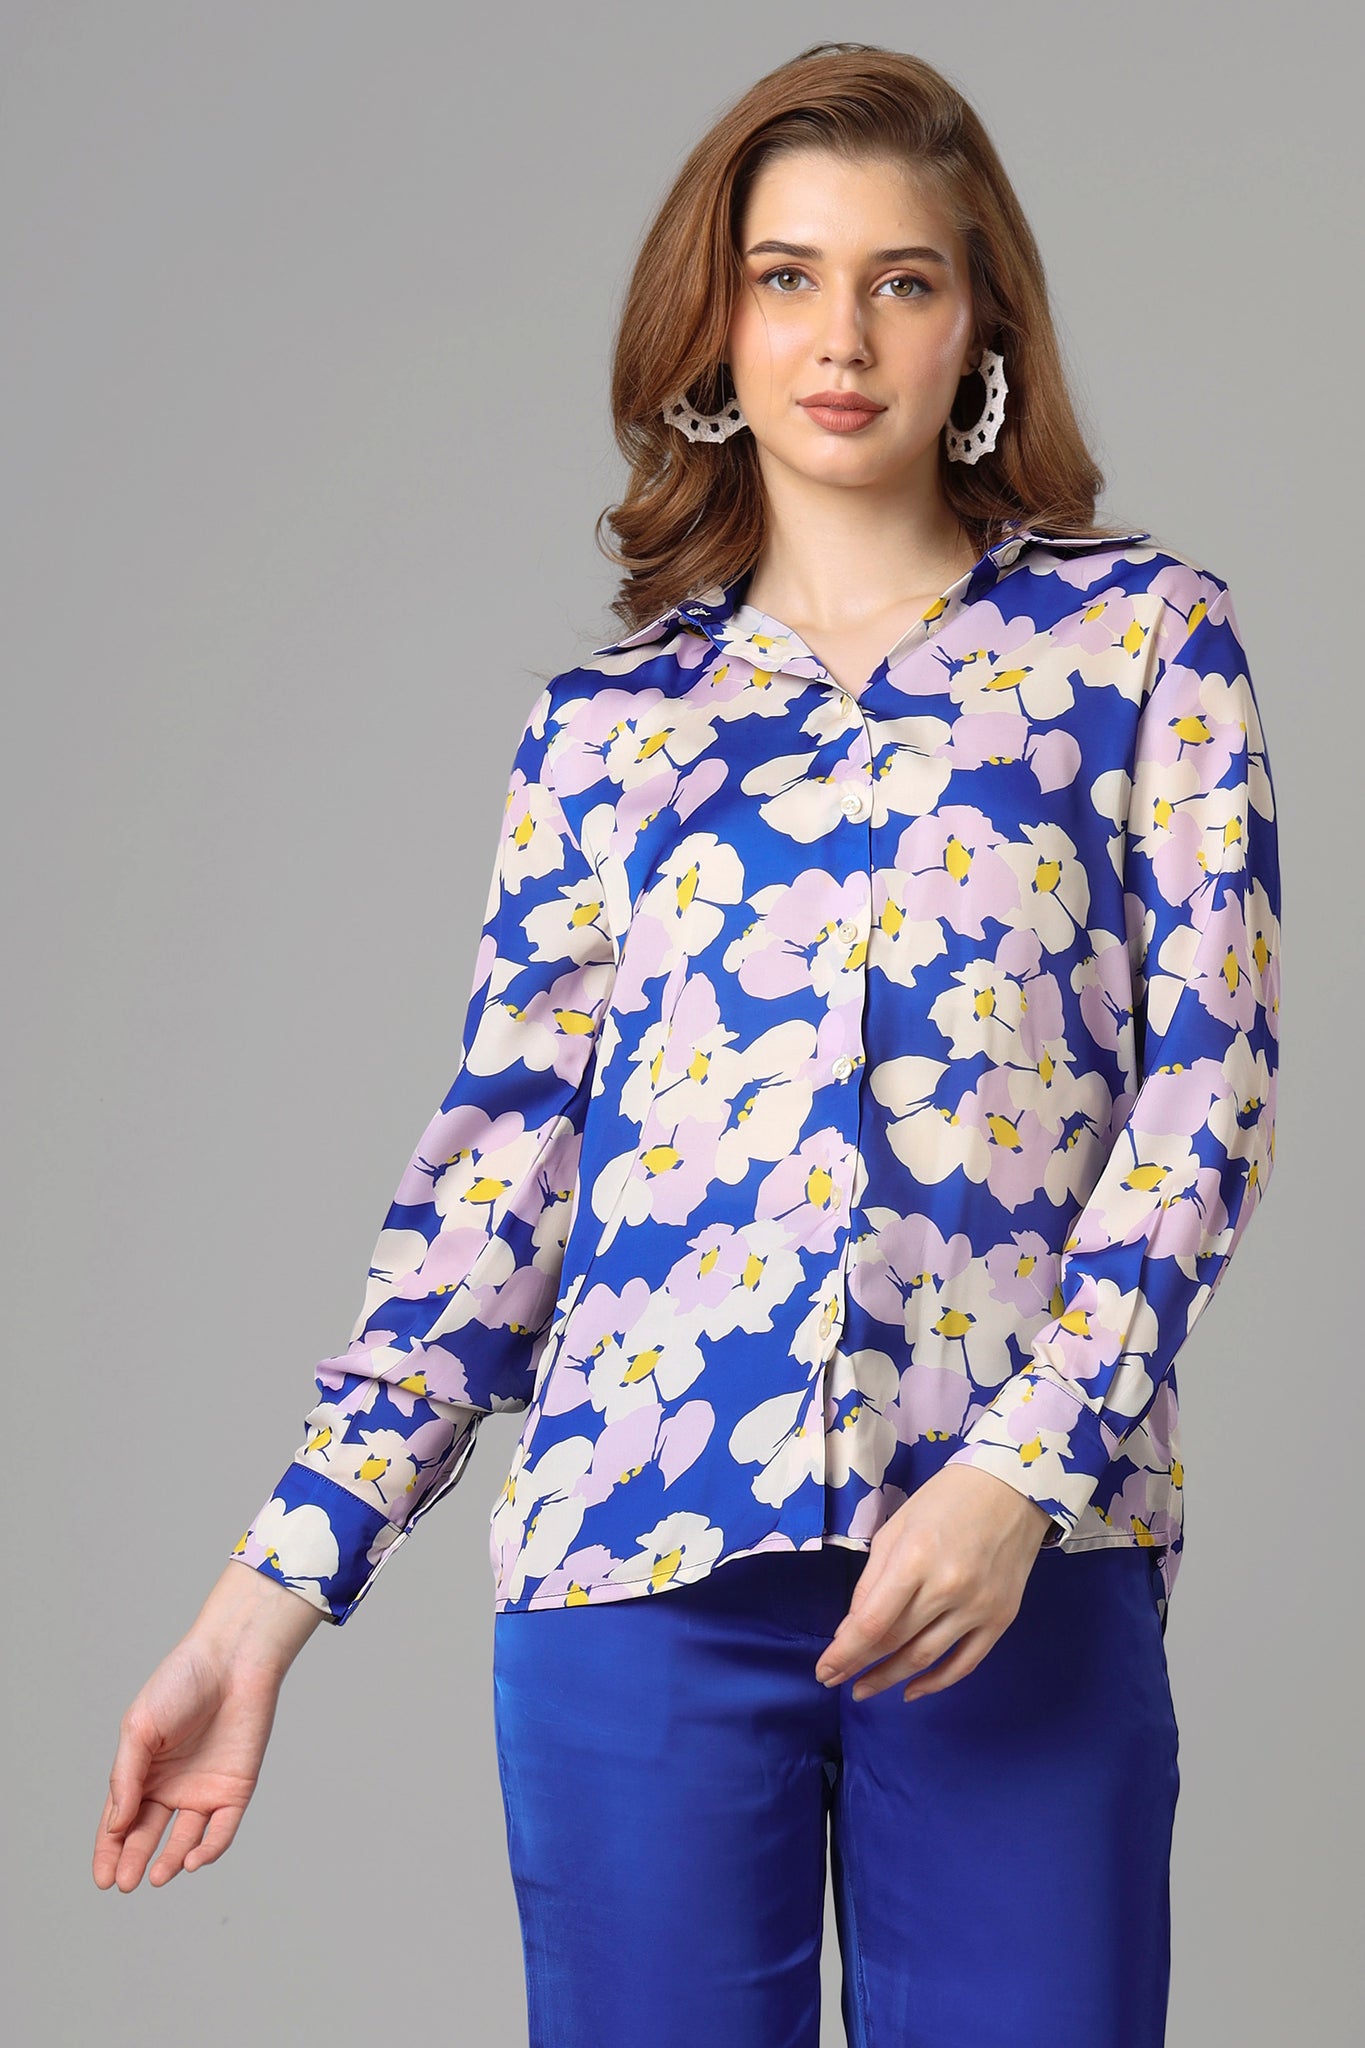 Attractive Royal Floral Shirt For Women